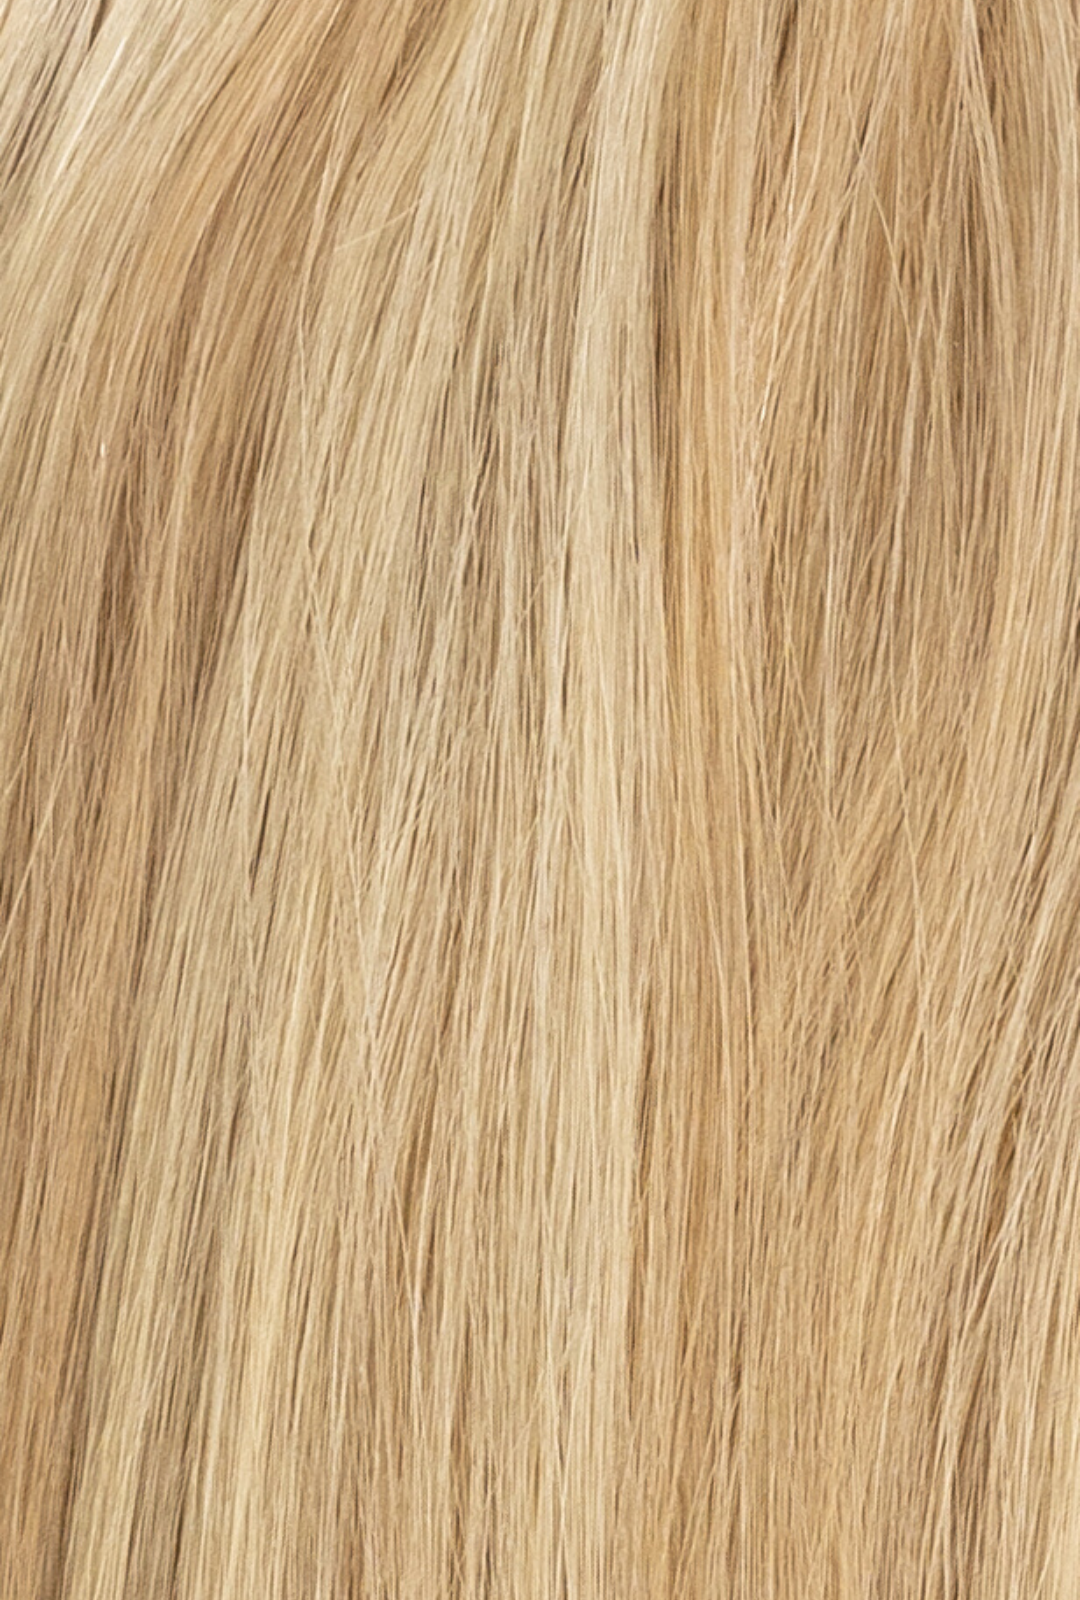 Laced Hair Keratin Bond Extensions Dimensional #18/22